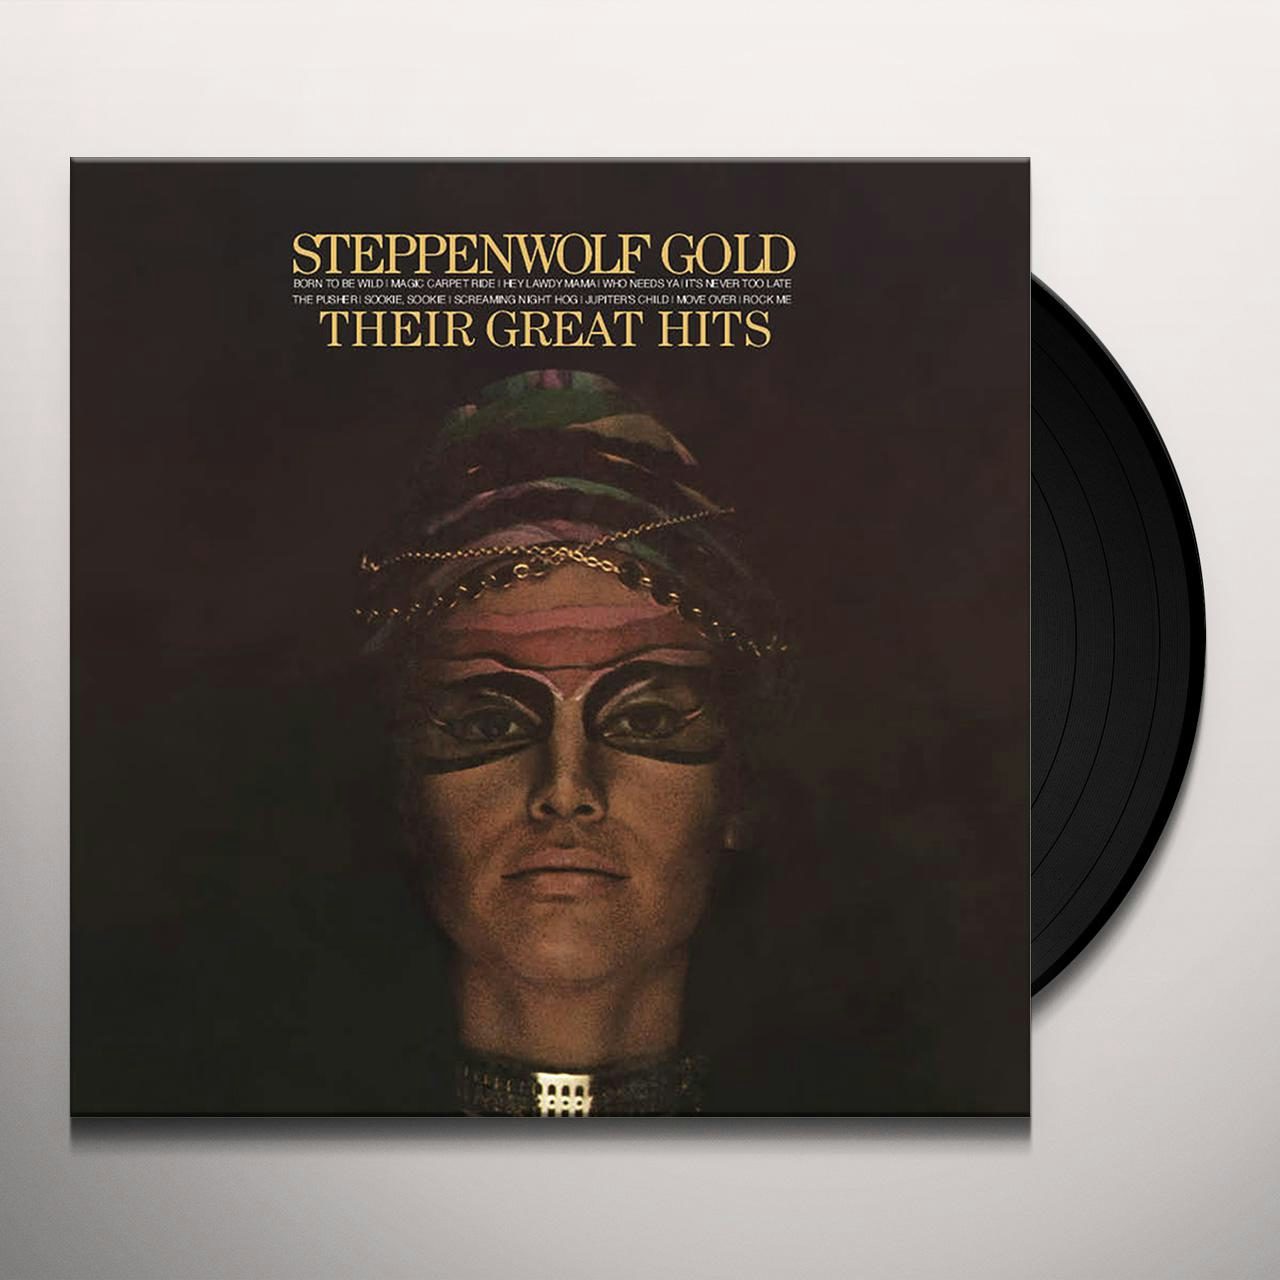 Steppenwolf Gold Their Great Hits Vinyl Record